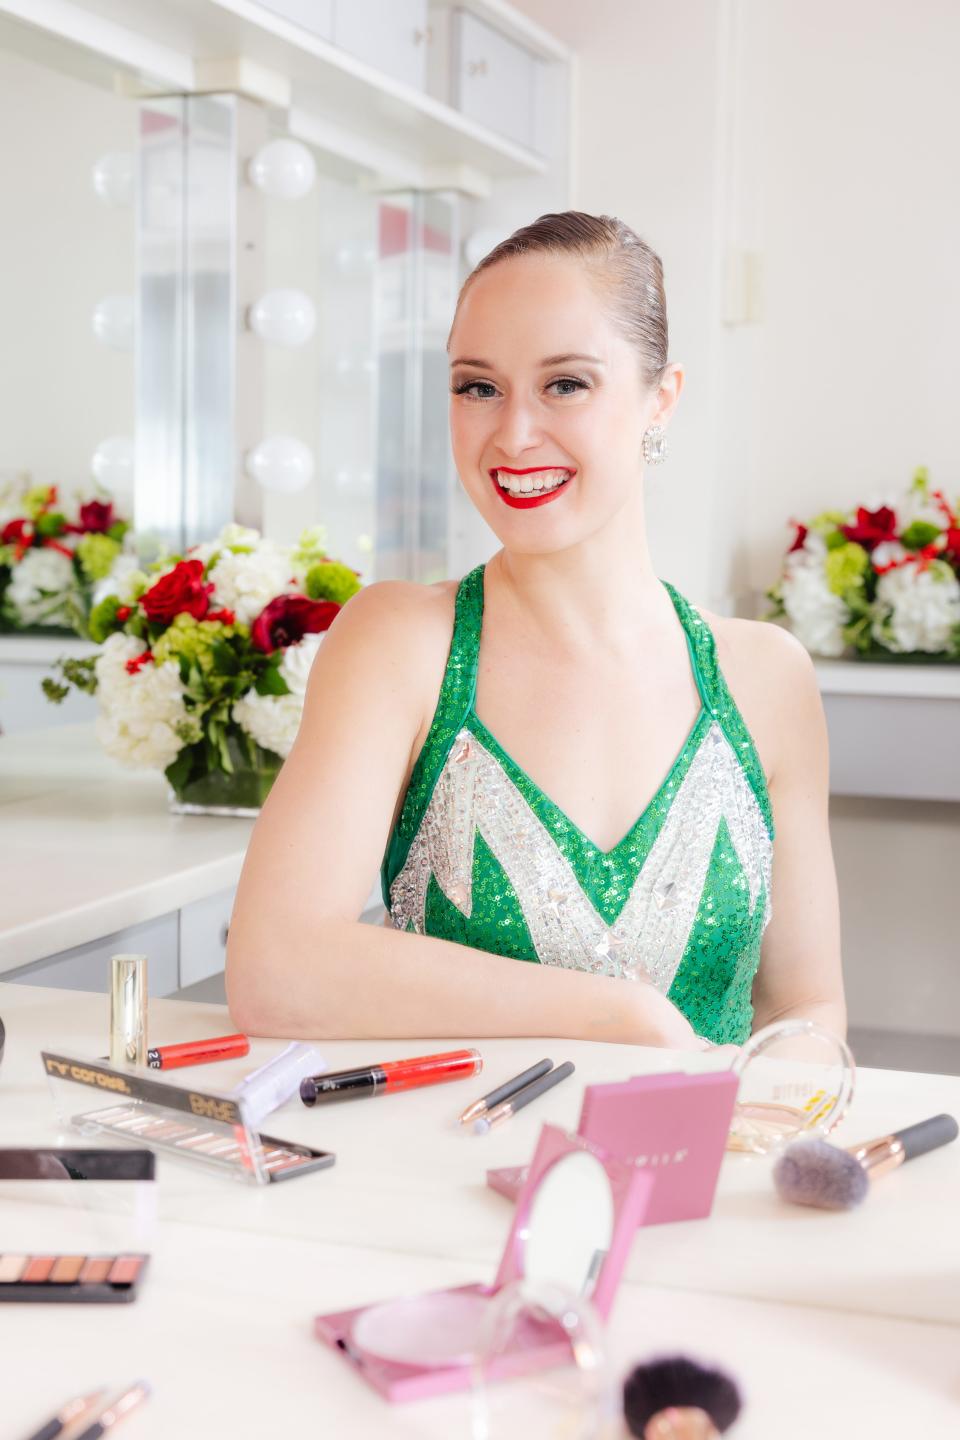 Alexis Campbell started her dance career in Fort Myers. Now she's dancing with The Rockettes.